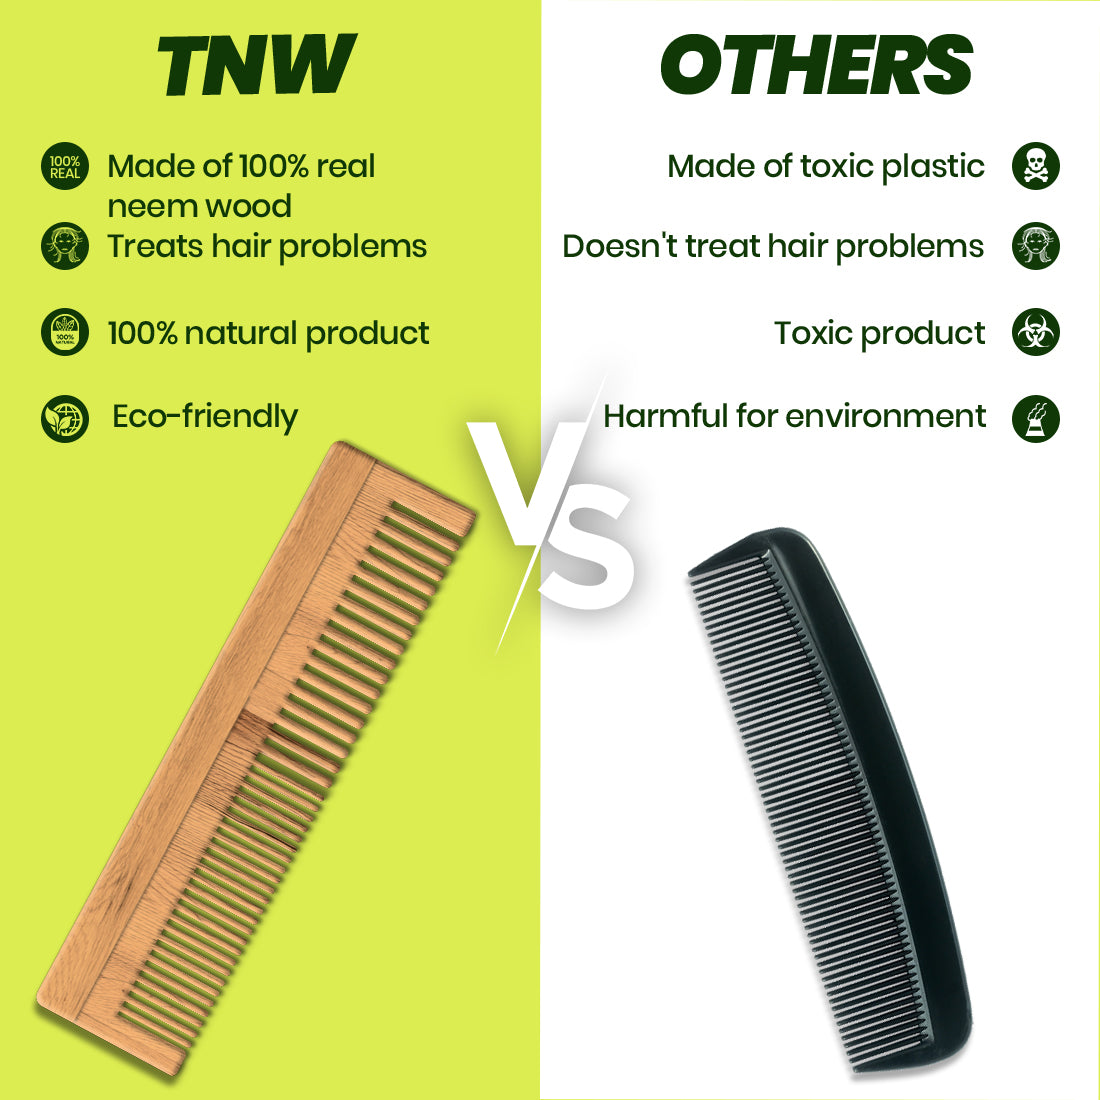 Buy IMVELO NEEM WOODEN COMB FOR HAIR GROWTH PROTECT FROM HAIRFALL   DANDRUFF  DUAL TOOTH COMB Online  Get Upto 60 OFF at PharmEasy